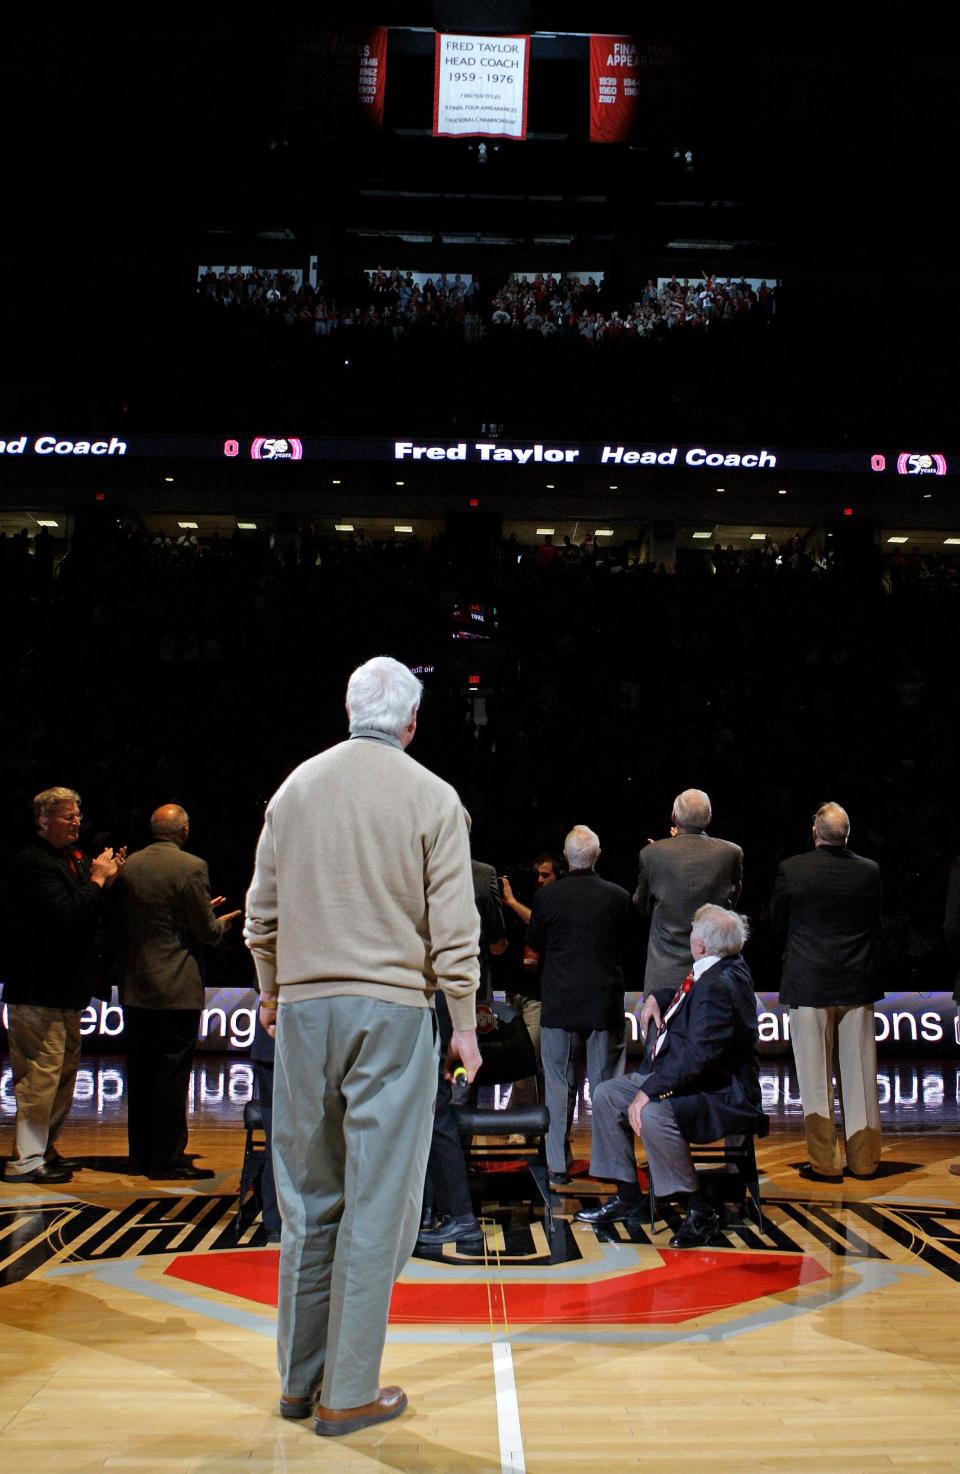 Former college basketball coach Bob Knight, front, along with other players from Ohio State's 1960 national championship team watch the unveiling of a banner during a halftime ceremony honoring coach Fred Taylor and the team Sunday, Jan. 31, 2010, in Columbus, Ohio. Some of the most notable players from the 1960 championship team include Jerry Lucas and John Havlicek, named two of the top 50 NBA greatest players in history, and Bob Knight, college basketball's winningest coach. (AP Photo/Jay LaPrete)